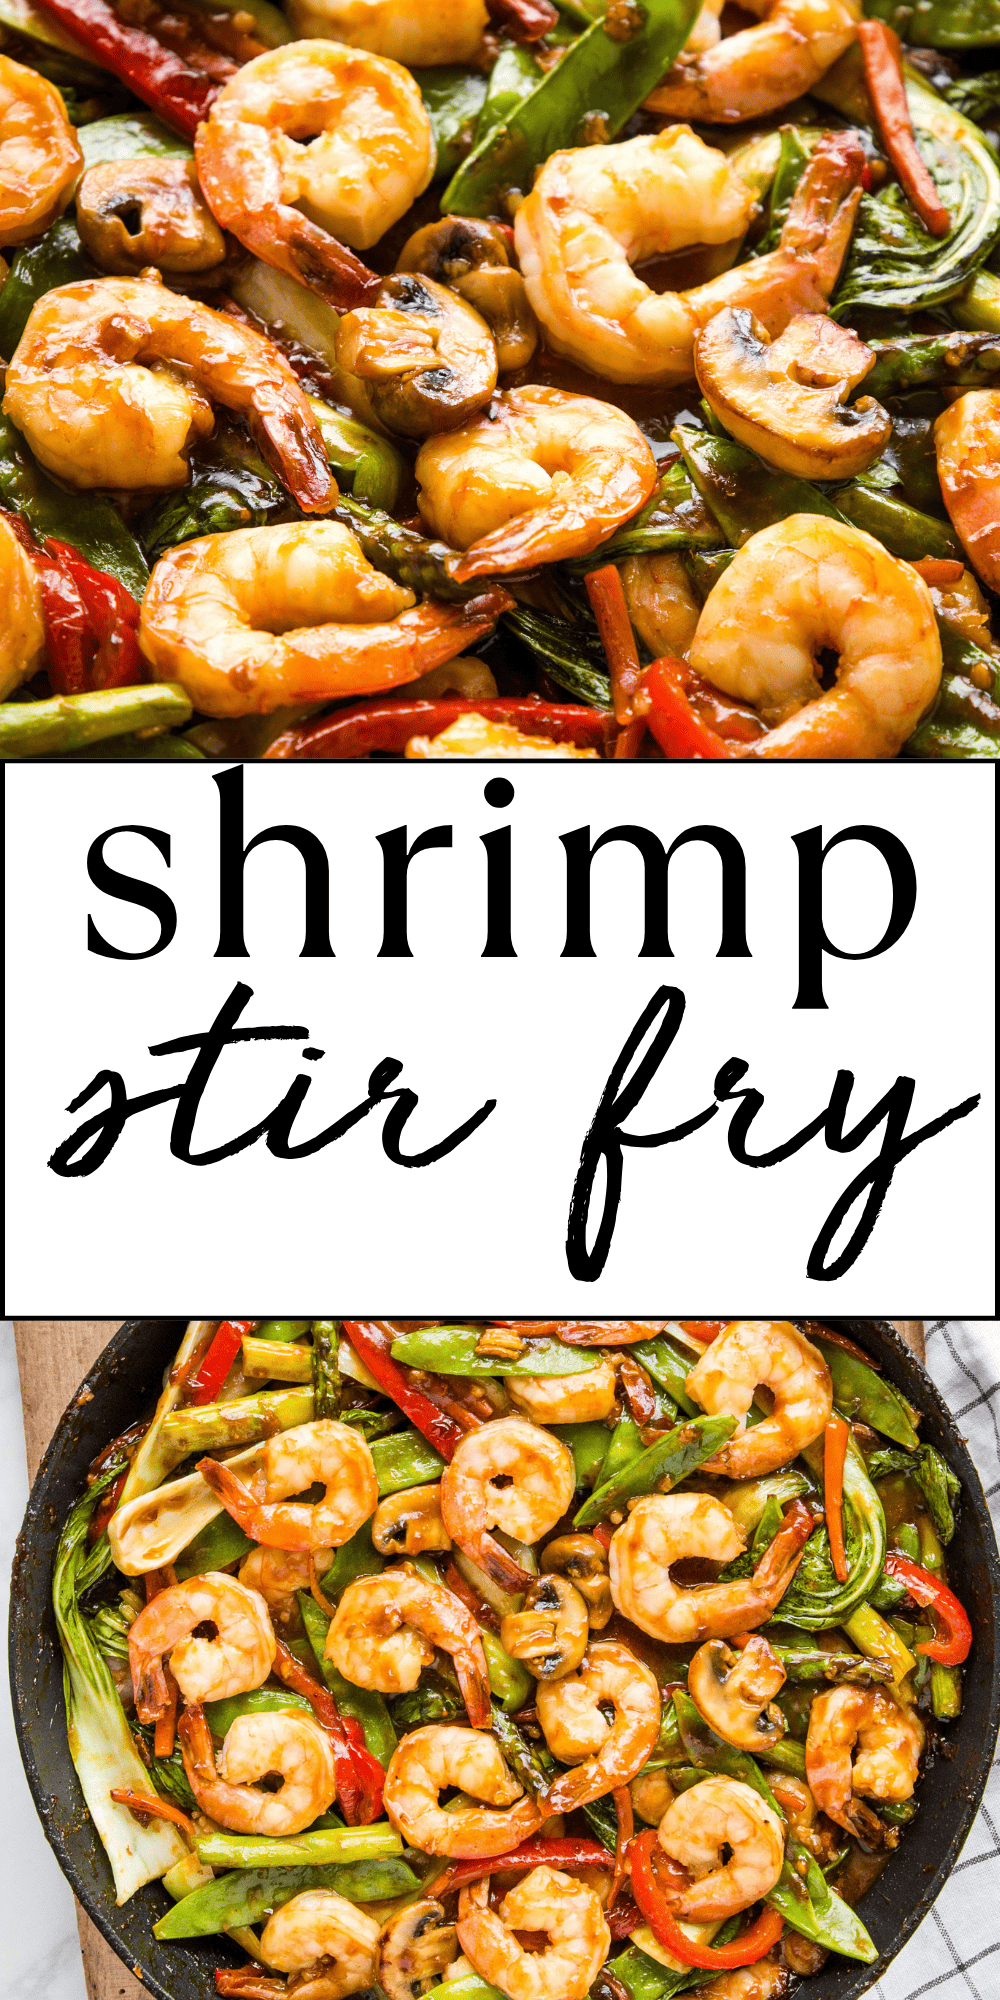 This Shrimp Stir Fry recipe is an easy weeknight meal that’s packed with lean protein and fresh vegetables – and it's on the table in under 30 minutes. A simple shrimp stir fry with an easy sauce and marinade – perfect for meal prep! Recipe from thebusybaker.ca! #shrimpstirfry #easystirfry #stirfryshrimp #shrimpstirfryrecipe #easymeal #easydinner via @busybakerblog